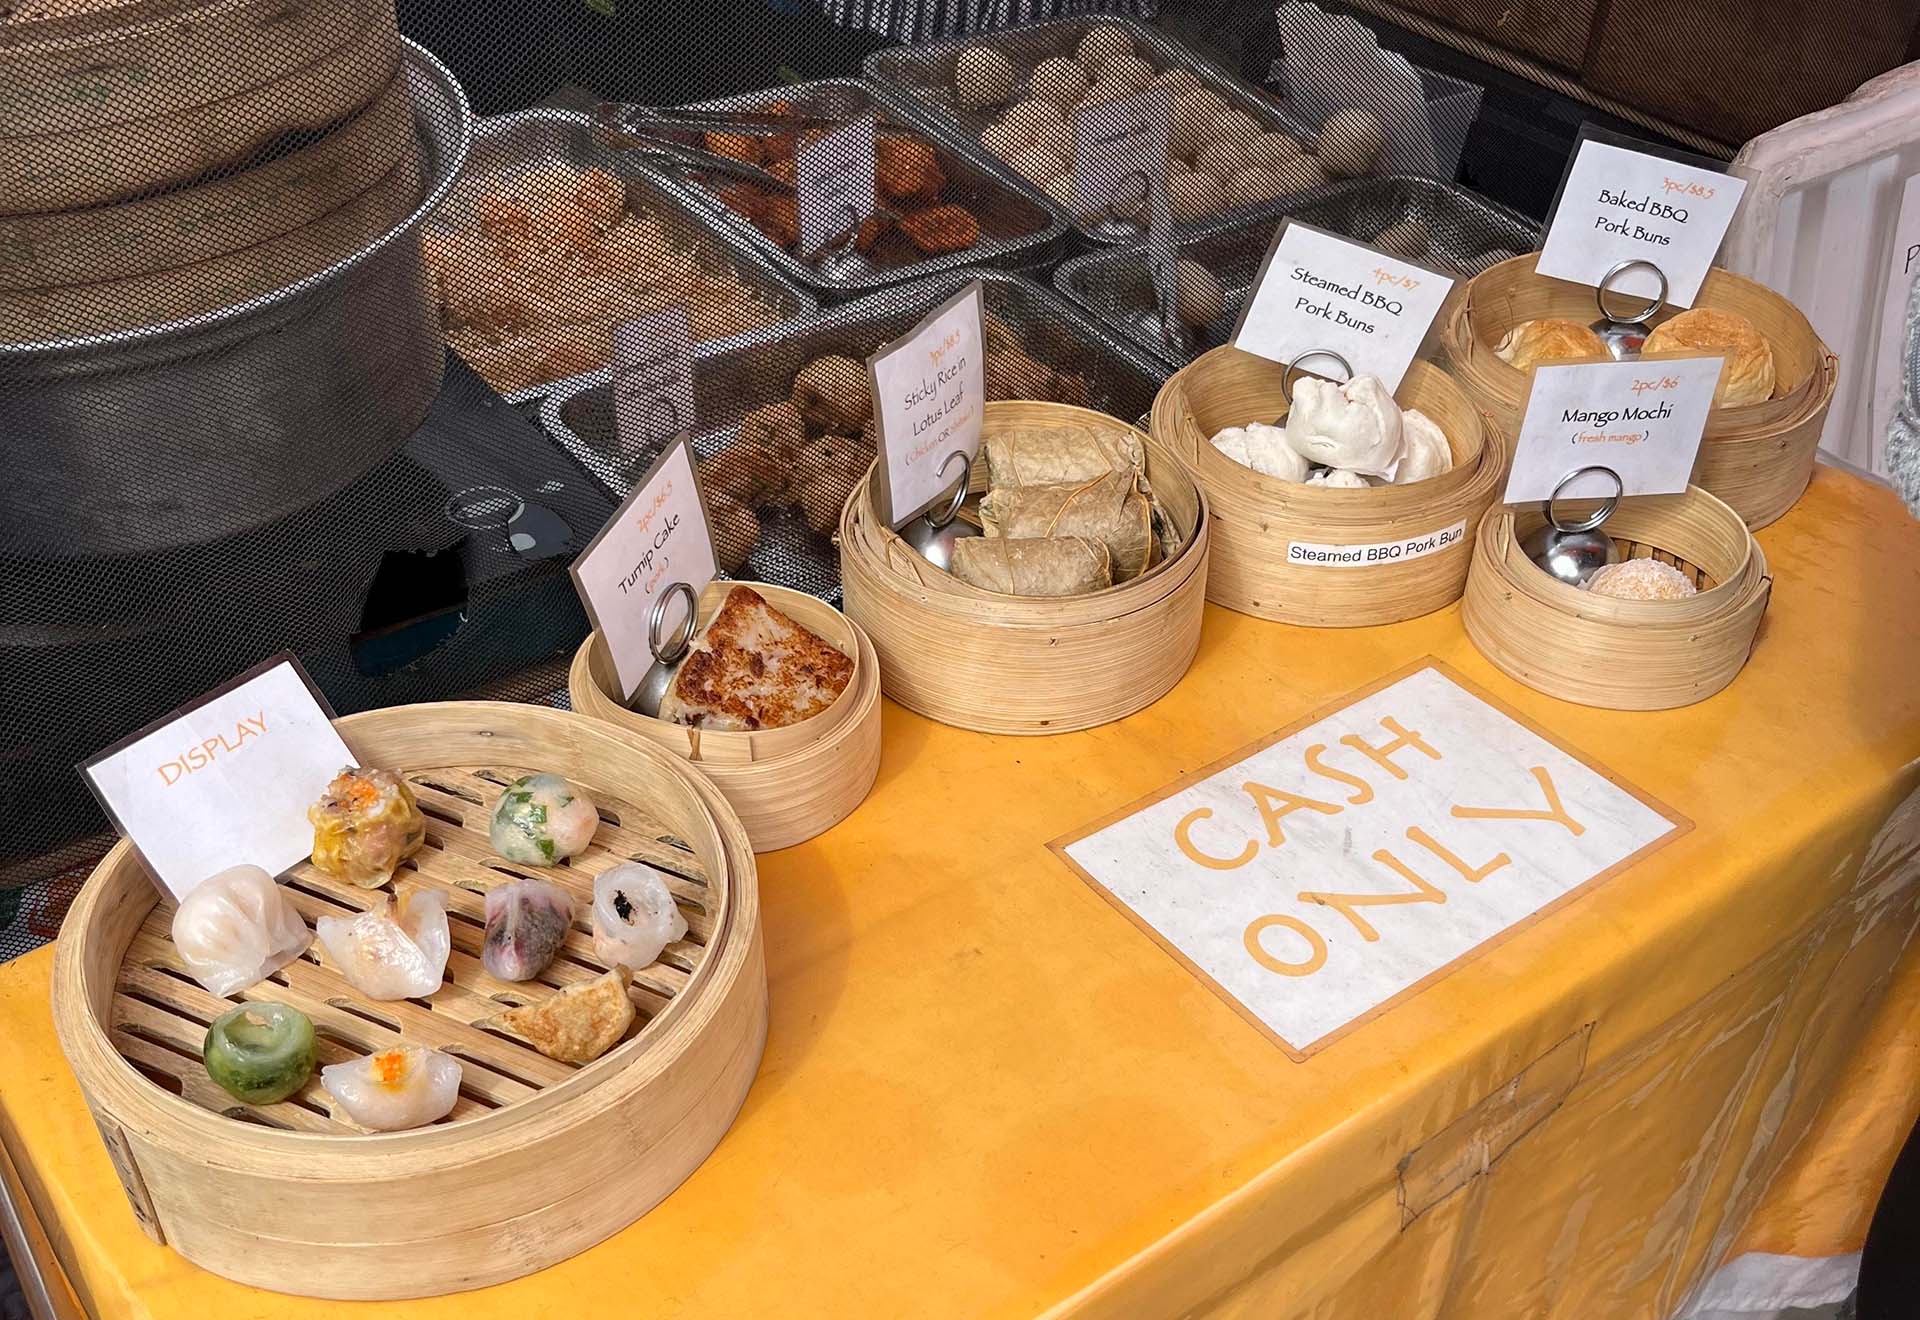 A display showing different kinds of dim sum available, all arranged in bamboo steamers. A sign on the table reads, "Cash Only."